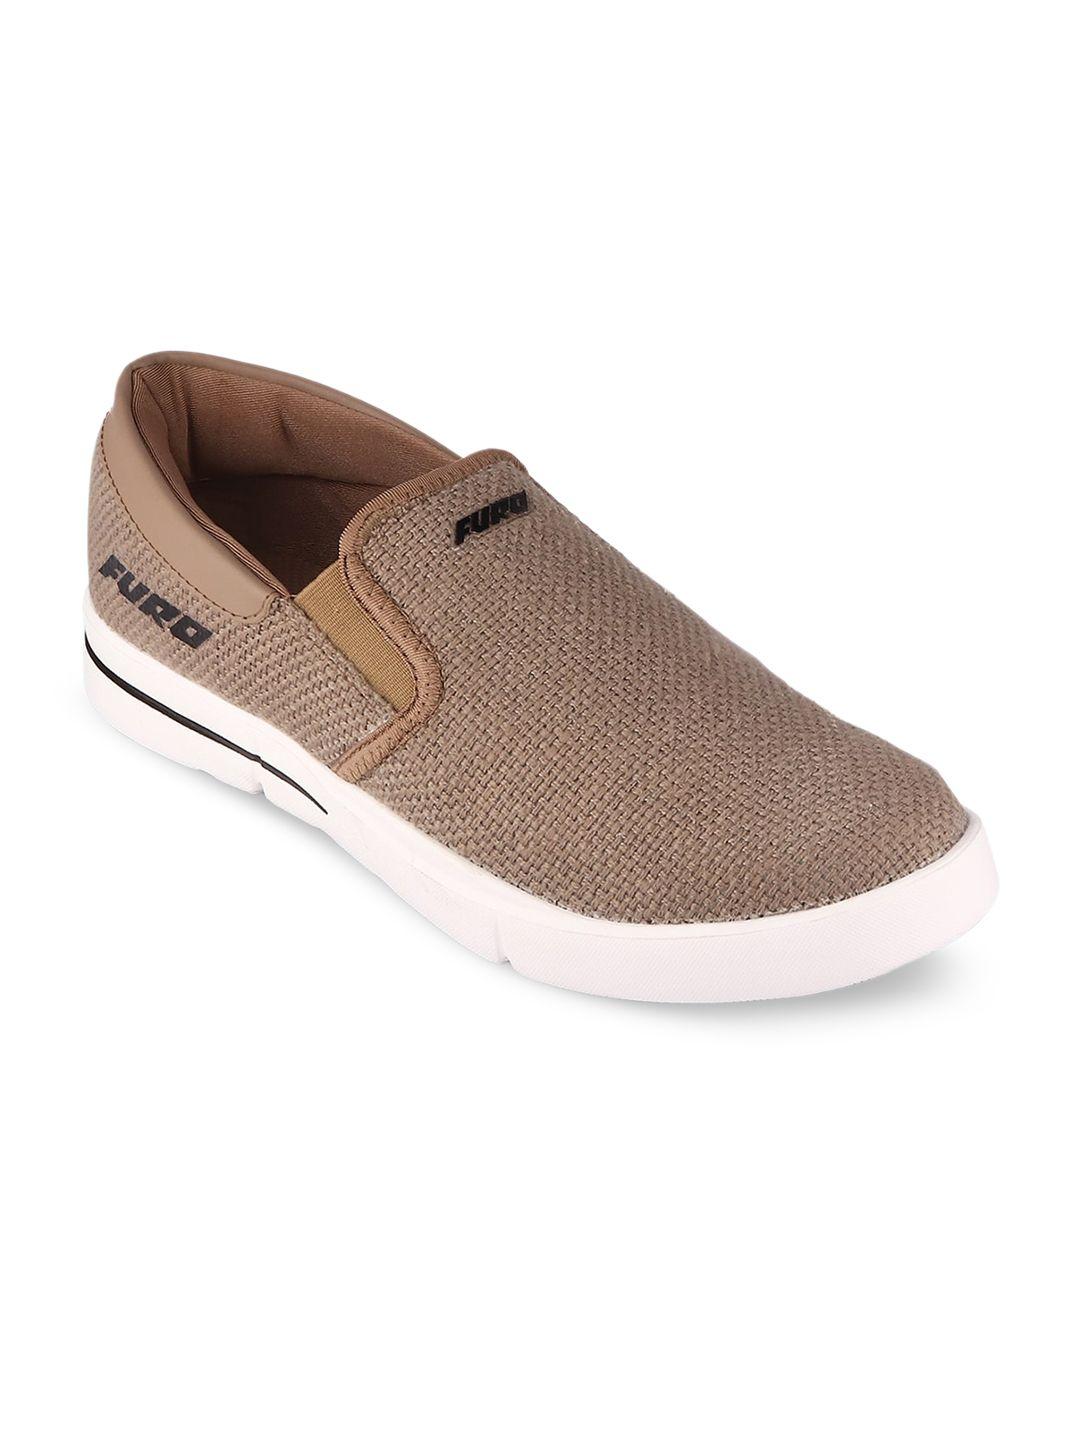 furo by red chief men woven design lightweight comfort insole slip-on sneakers